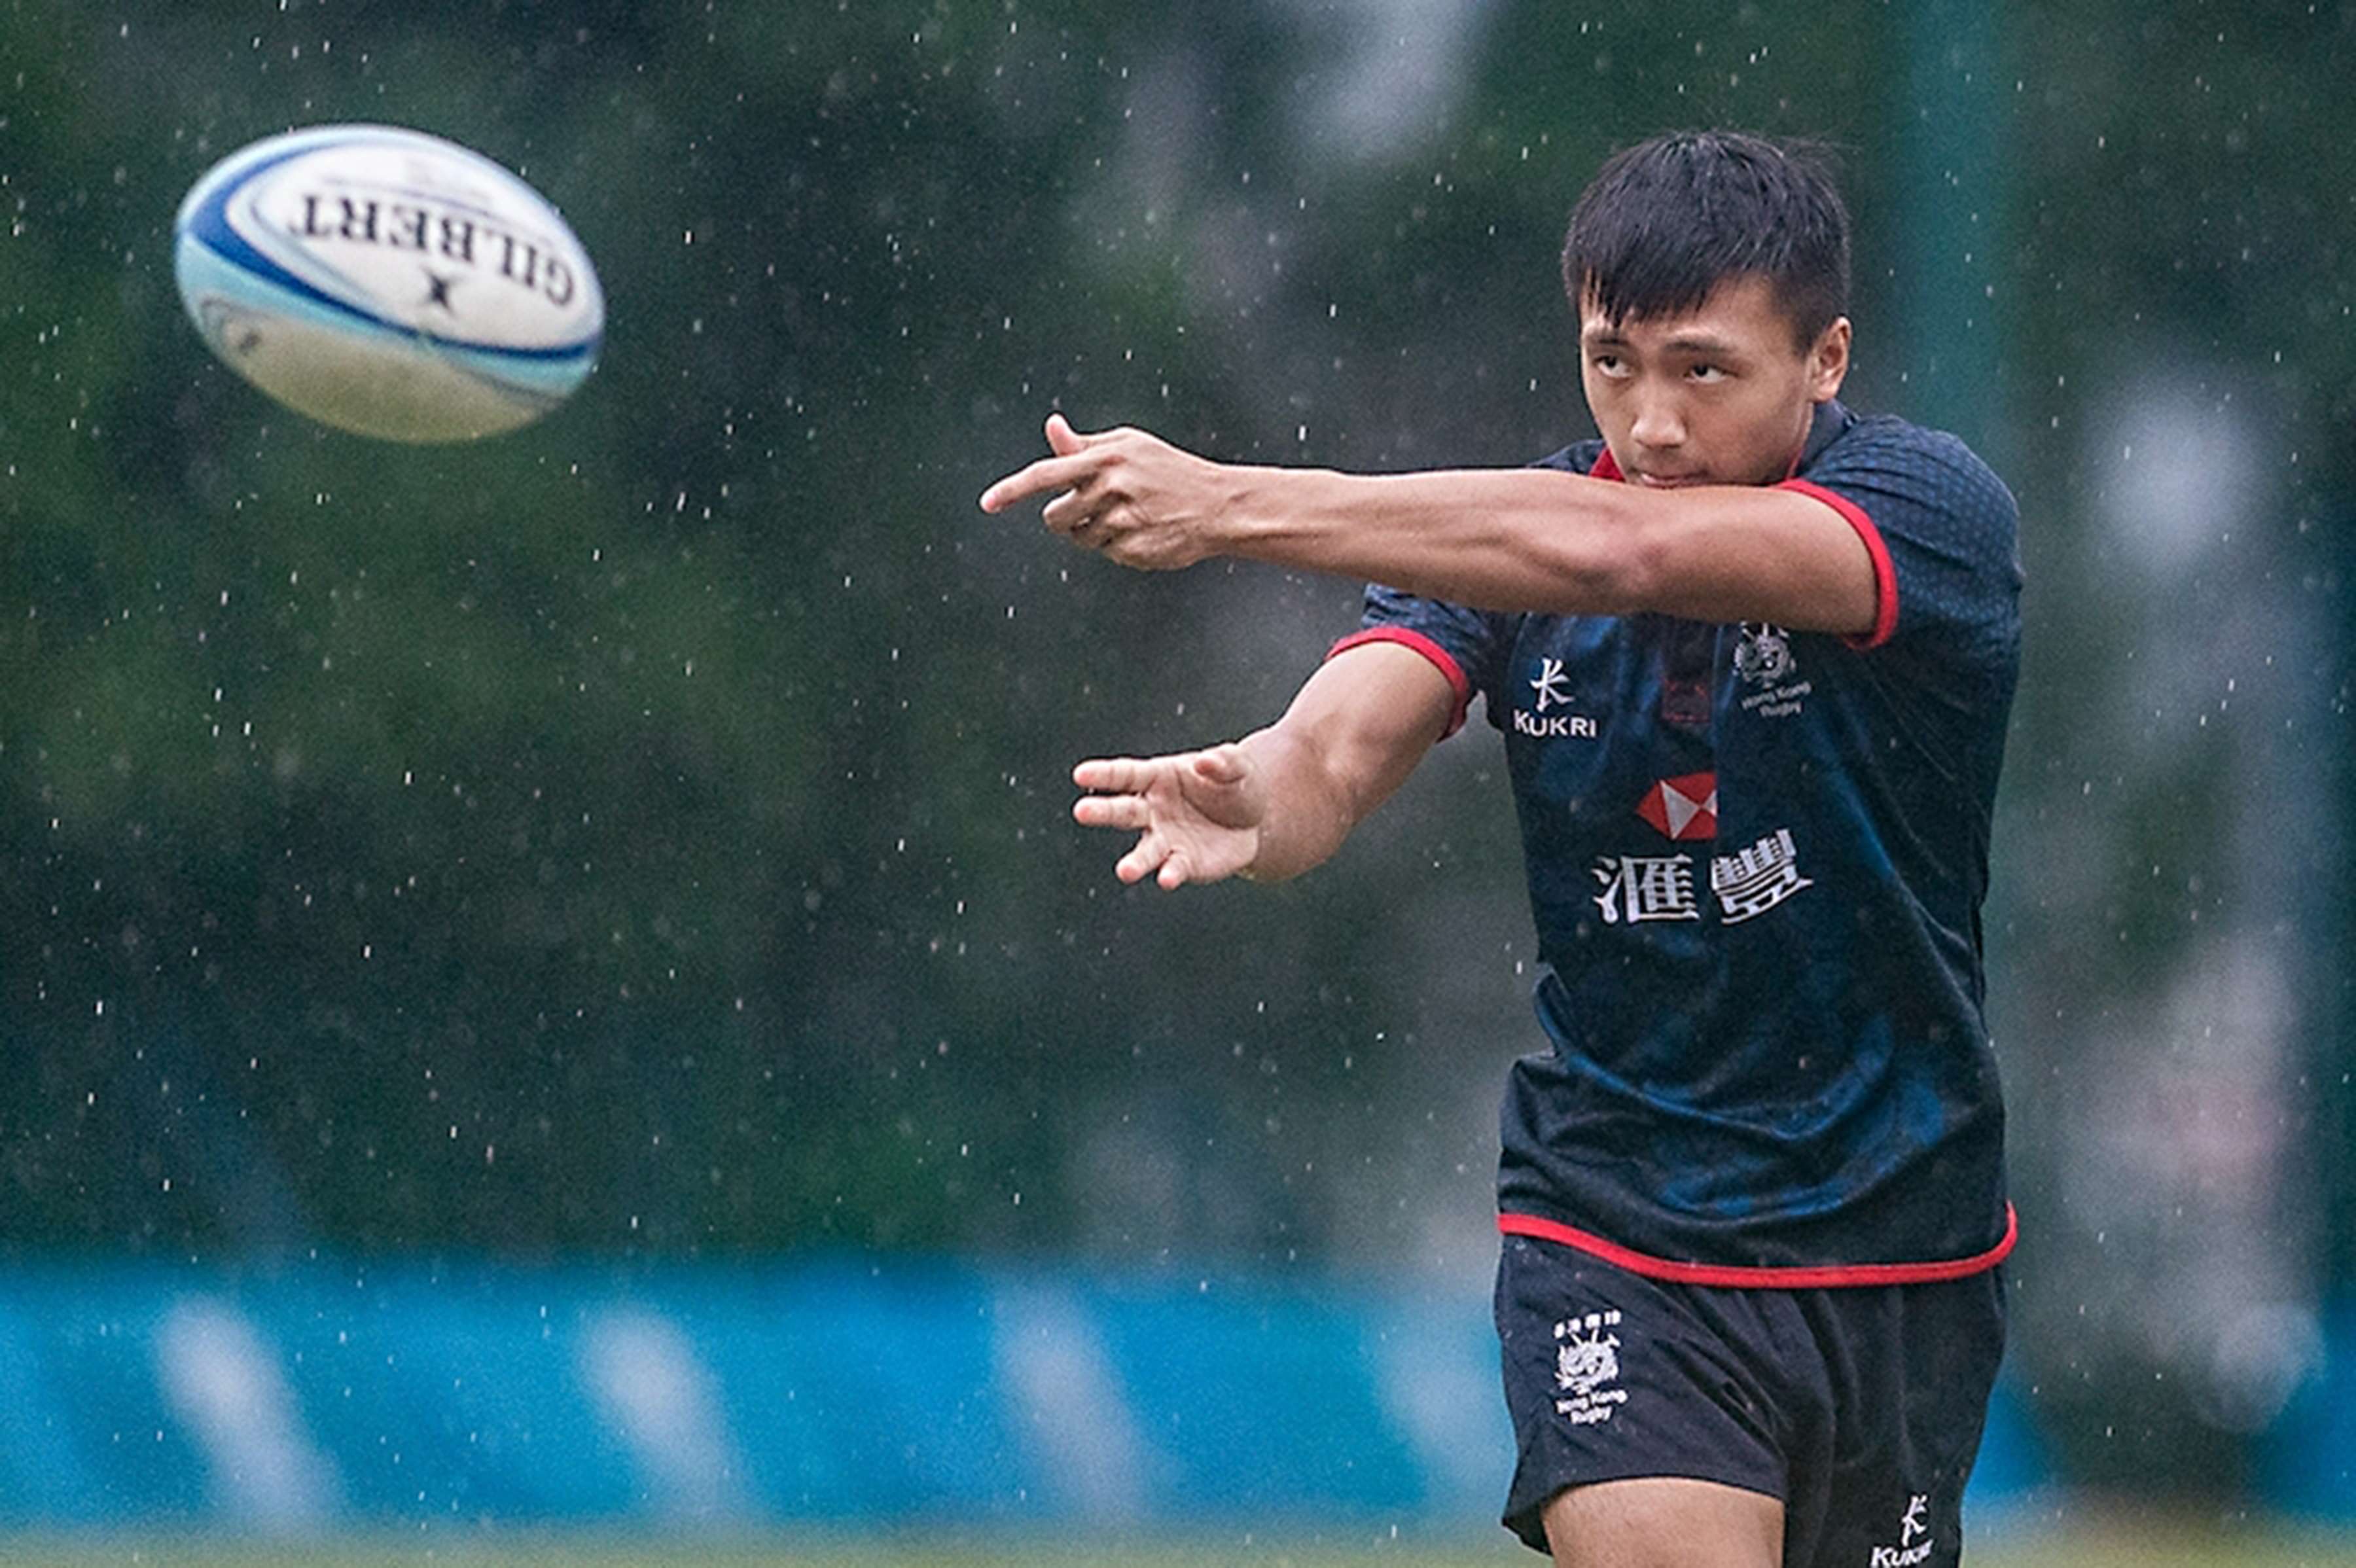 “I think my finishing and stepping [are] my strongest skills,” says Eric Kwok ahead of his senior debut with the Hong Kong sevens side in Monaco. Photo: HKRU